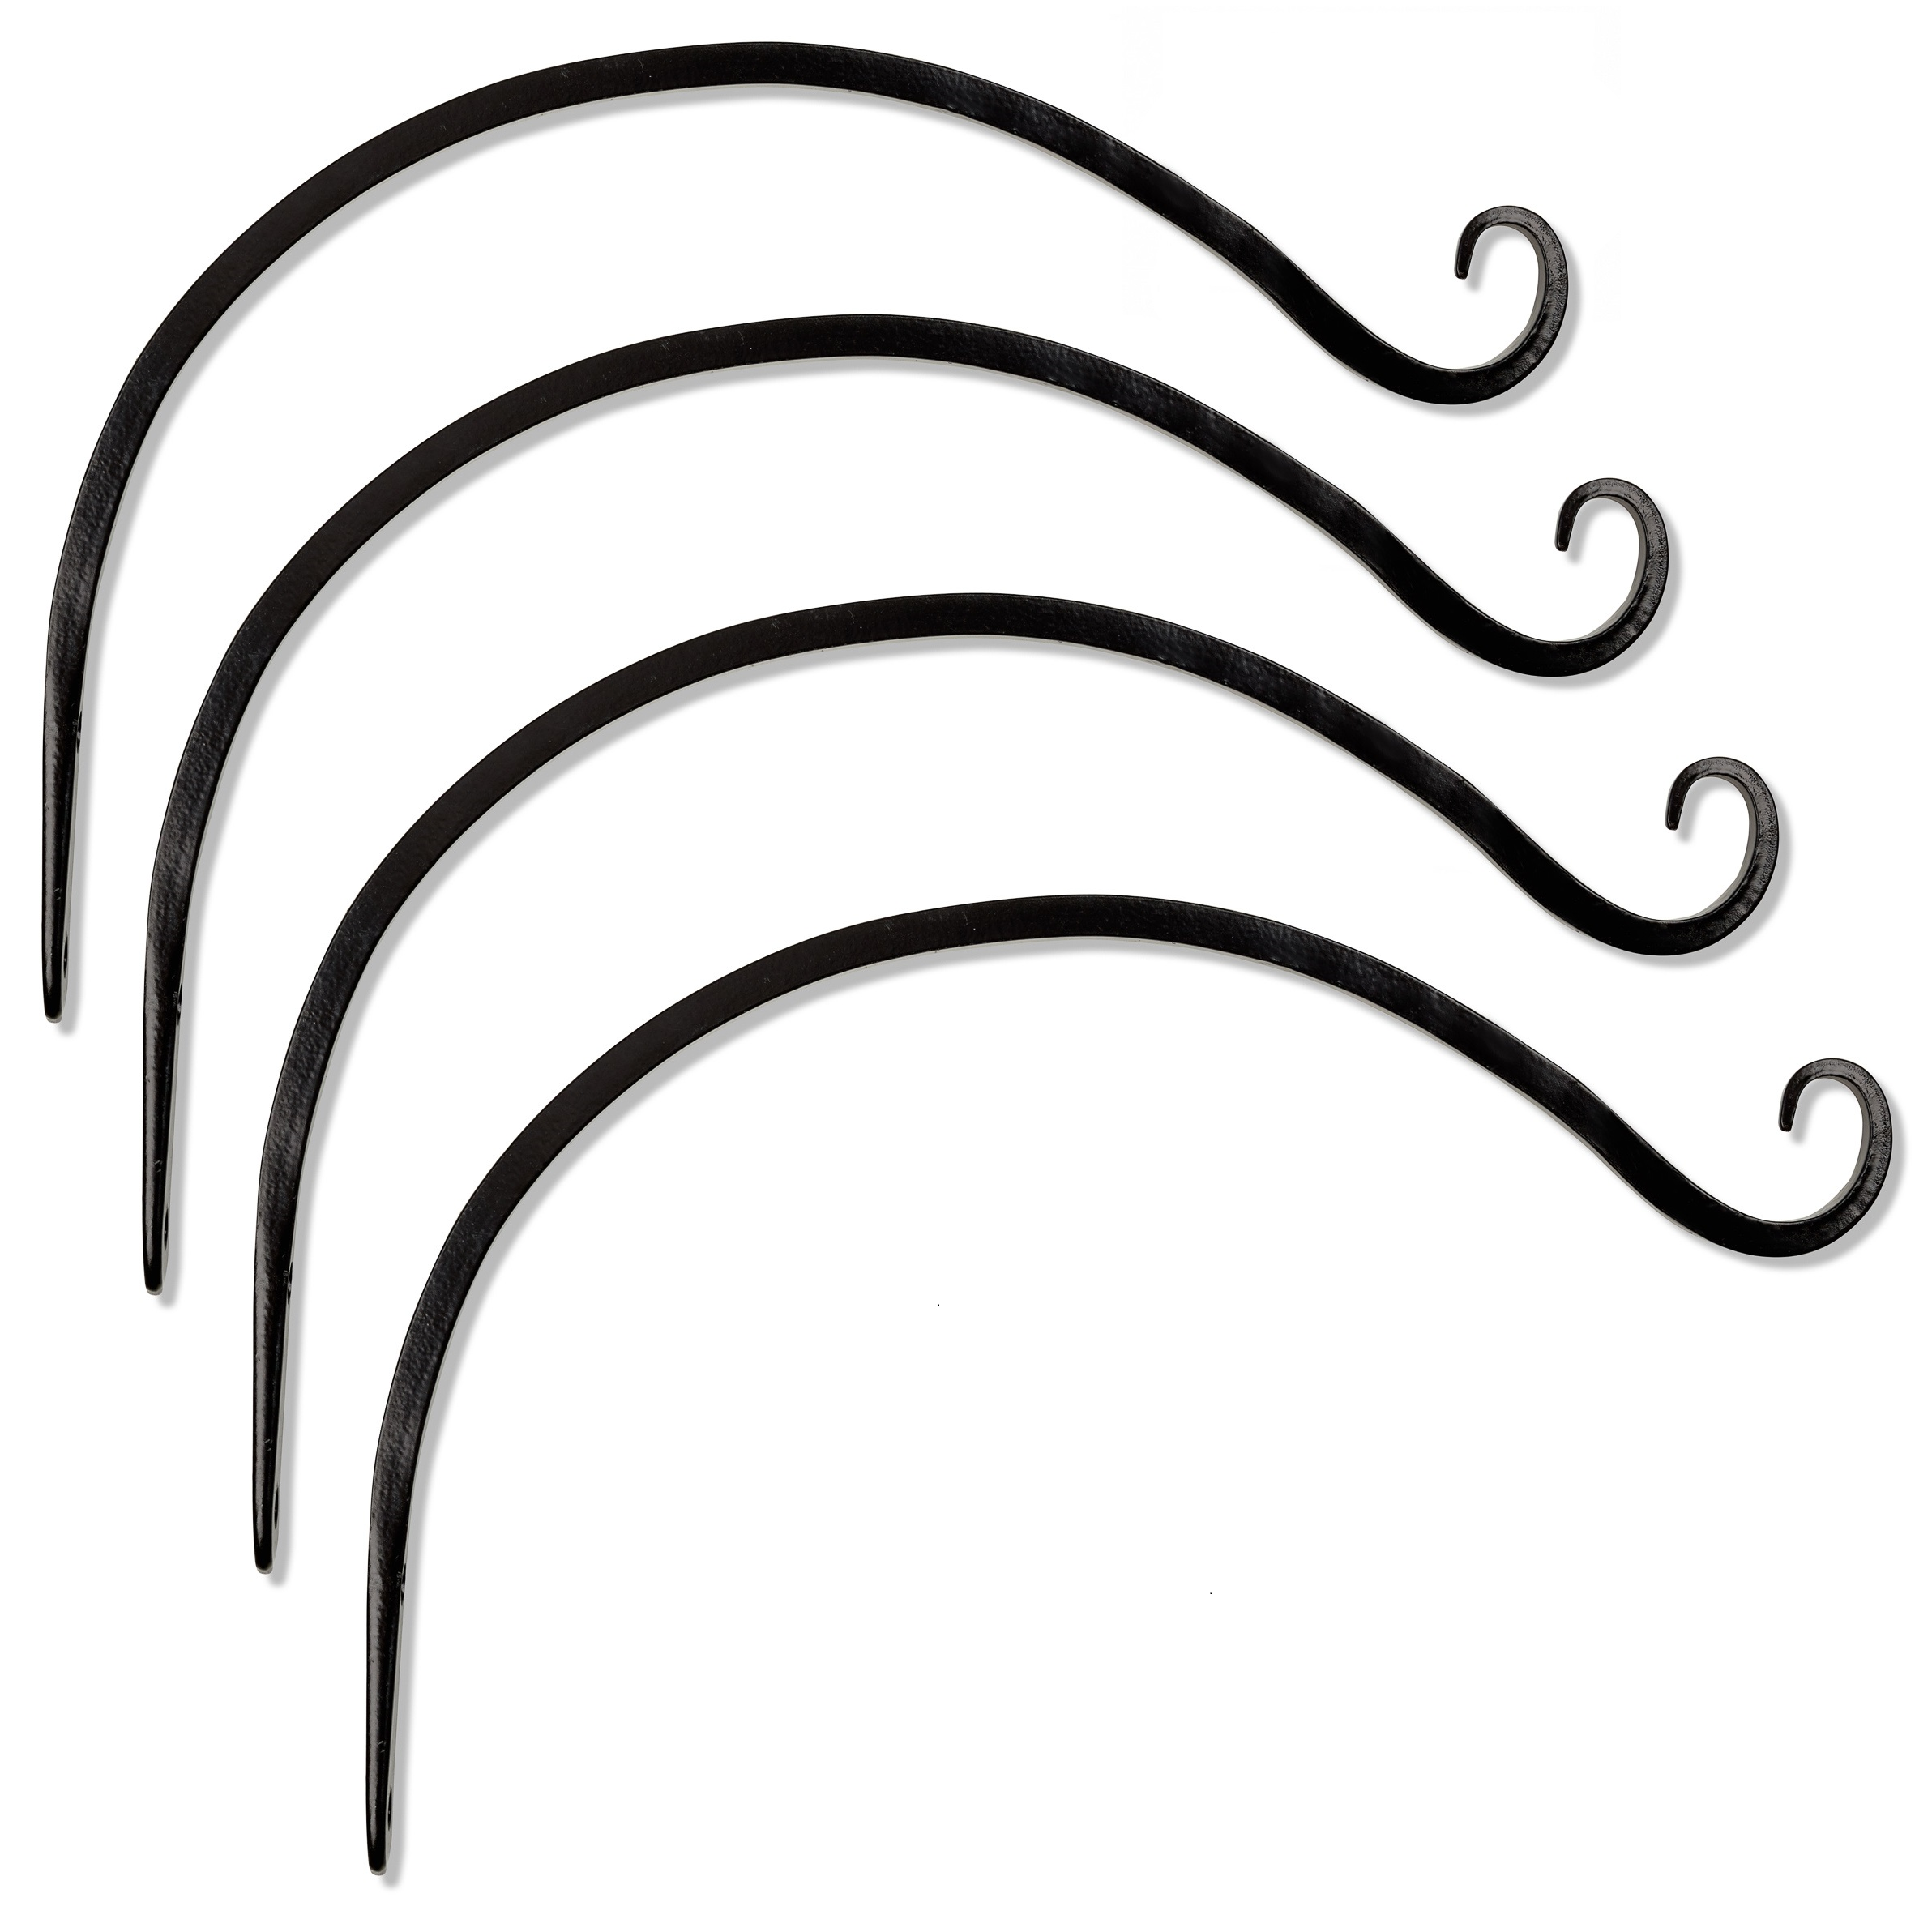 Cast Iron Wall Hooks for Bird Feeders Planters Gray Bunny GB-6837A Fancy Curved Hook White Lanterns Wind Chimes As Wall Brackets and More! 